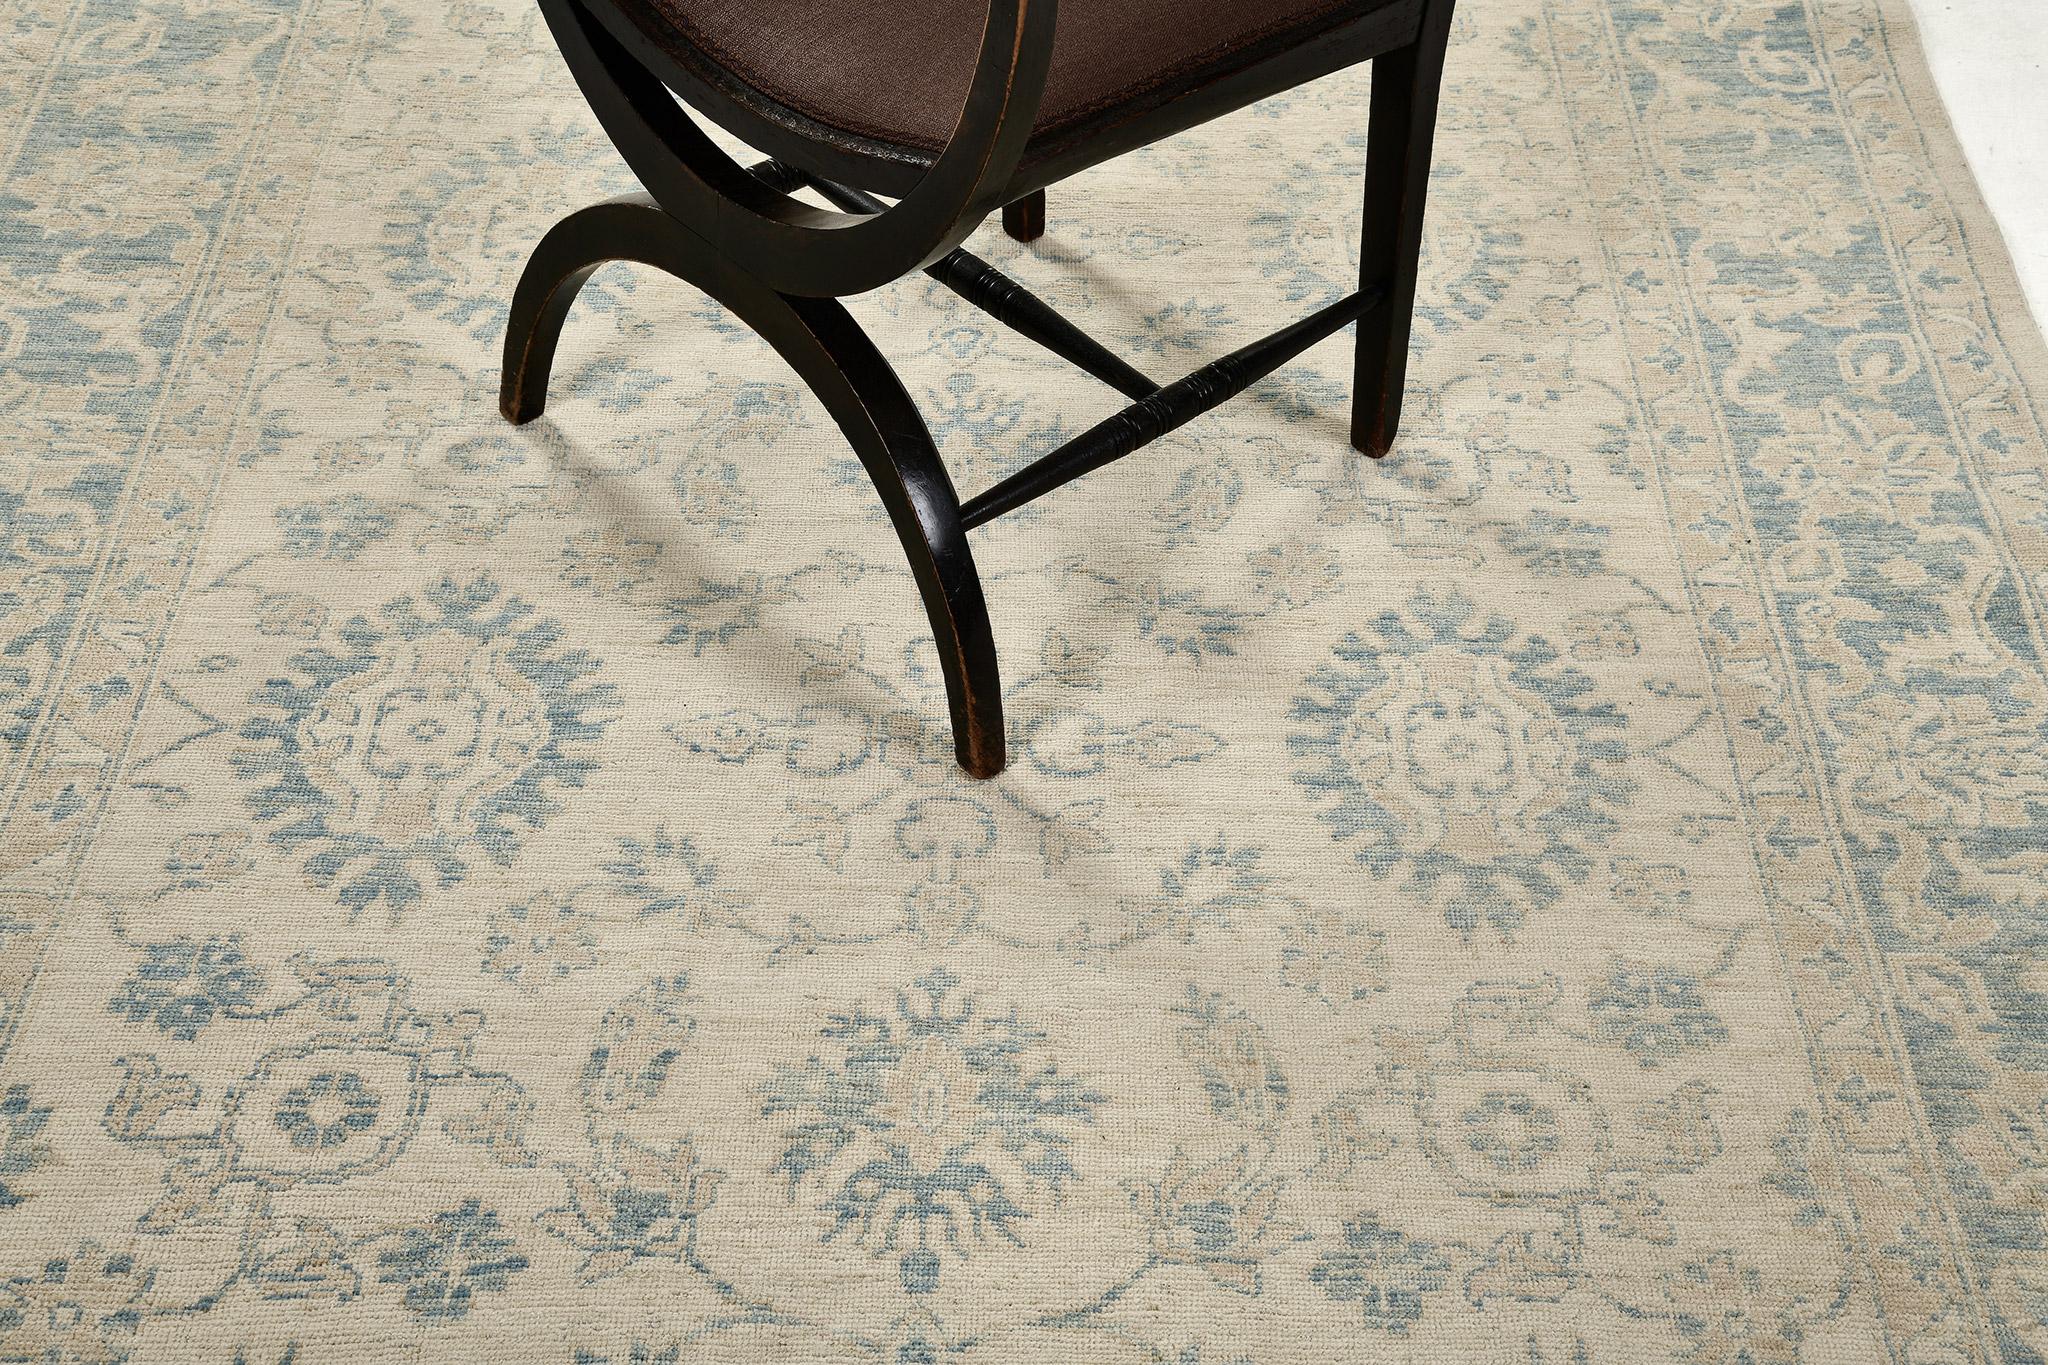 An elegant revival of Sultanabad design rug in the stunning muted neutral tones that come together and gave the feeling of genuine serenity. An all-over pattern of blooming palmettes and interconnected vines enclosed by an embellished ornate box